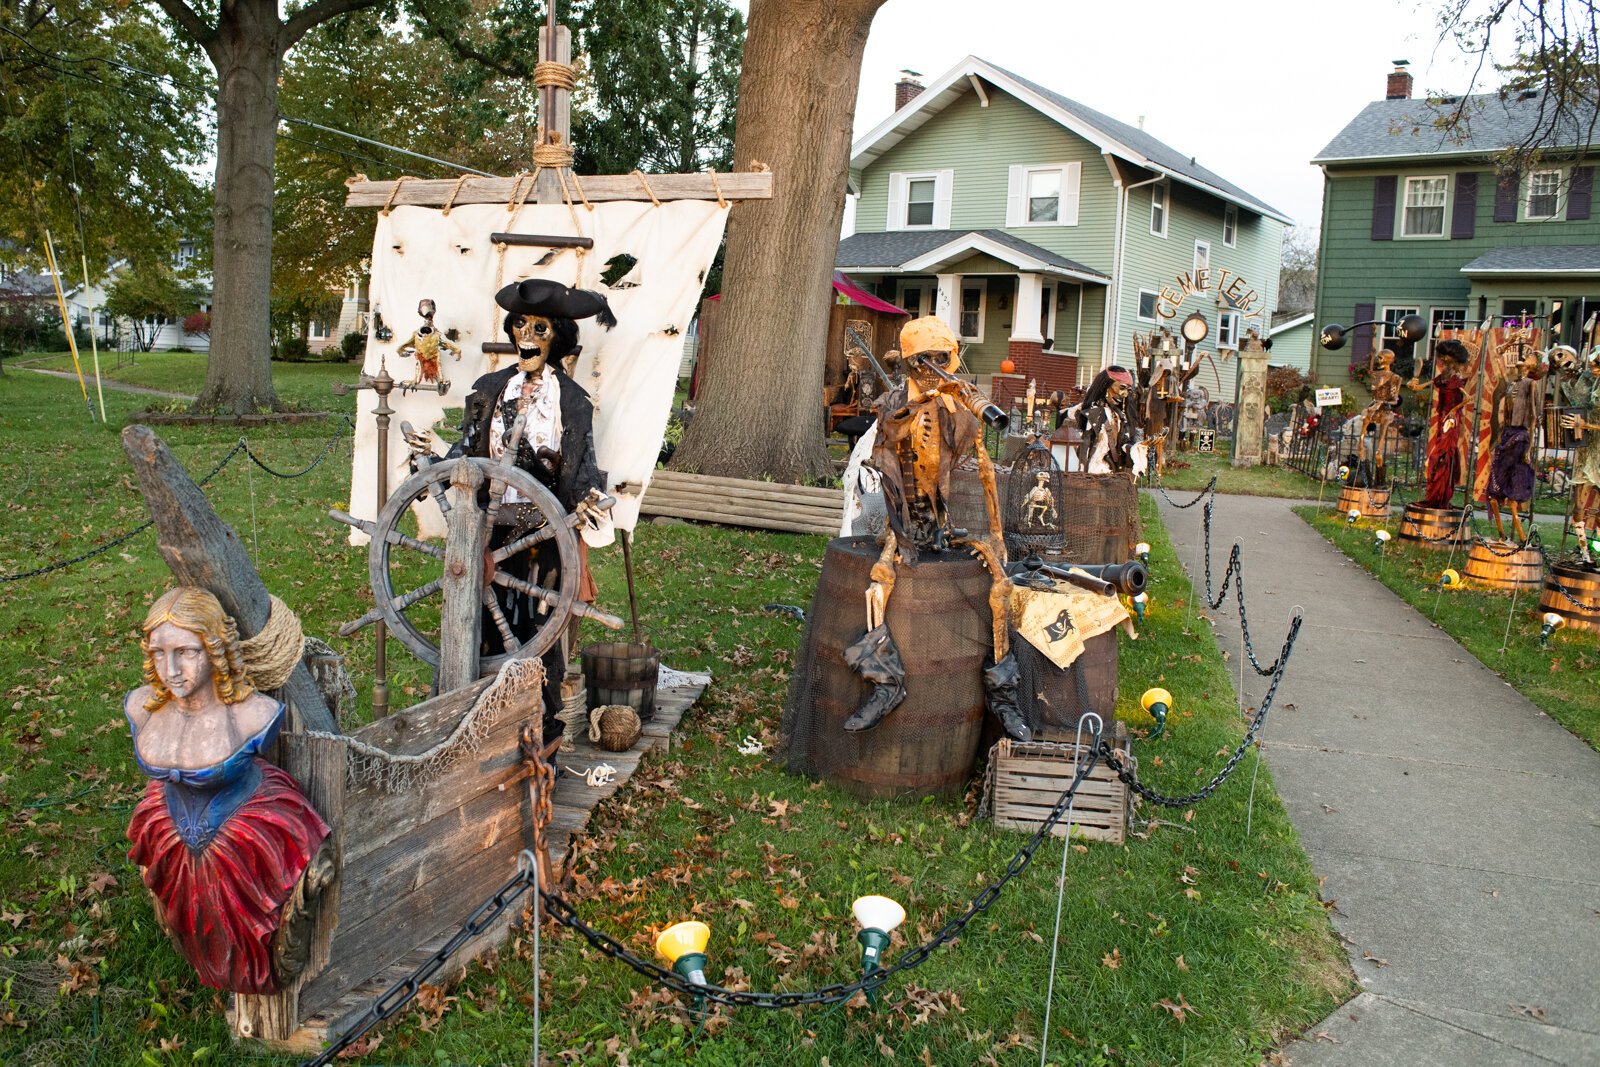 Halloween decor at 4429 Indiana Ave. in Fort Wayne.